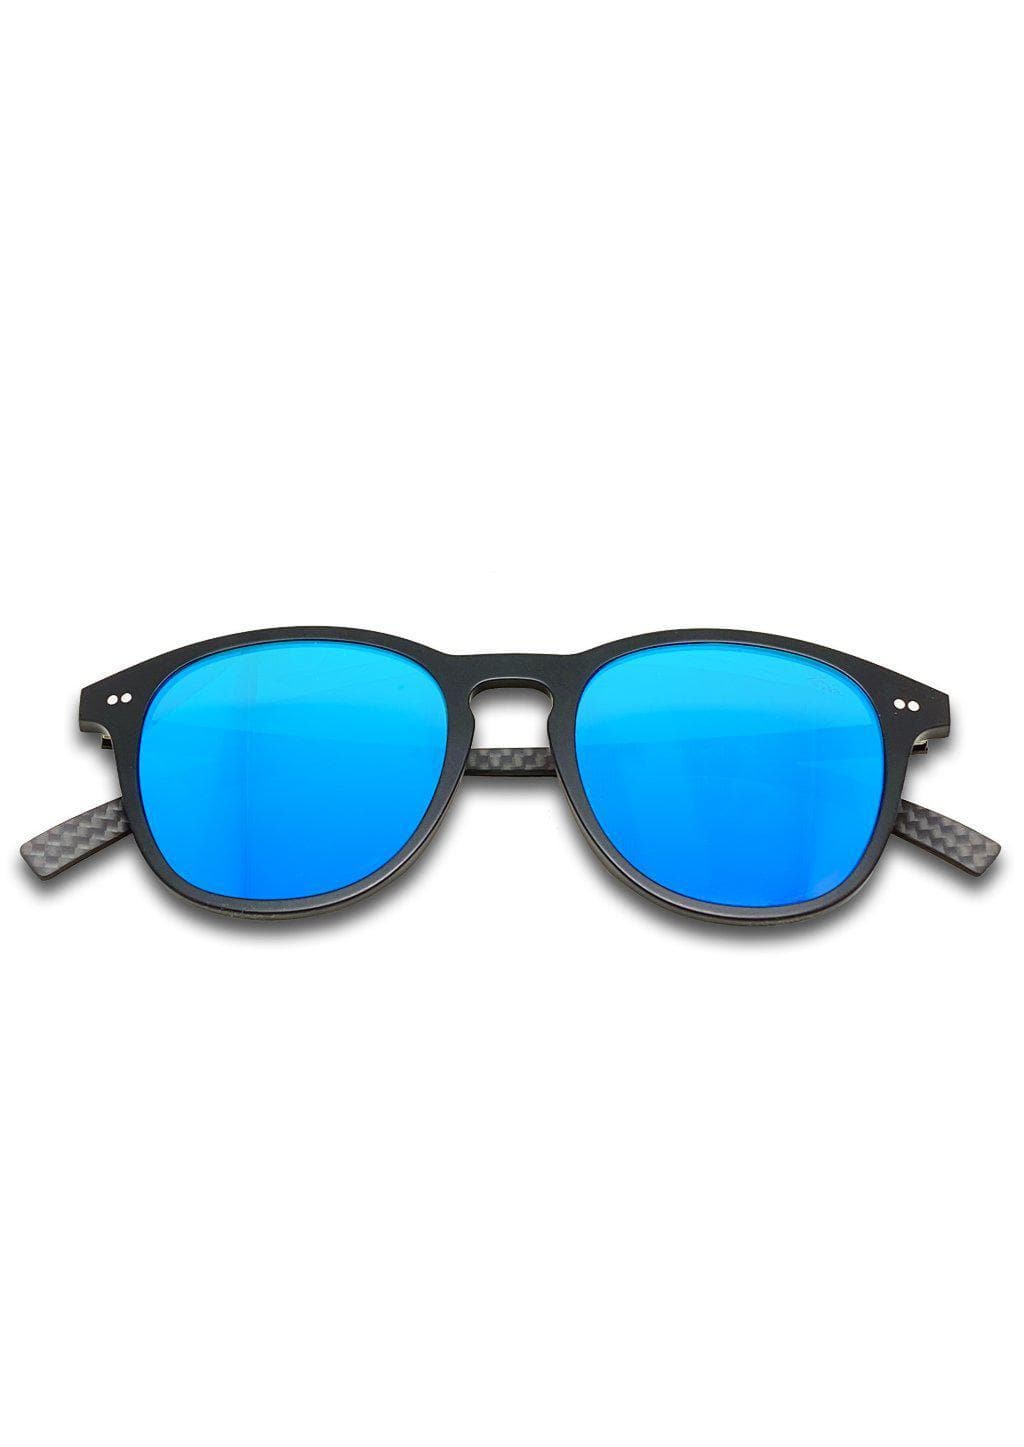 Hybrid - Halo, carbon fiber and acetate sunglasses of the highest quality. Black frame with blue mirror lenses.